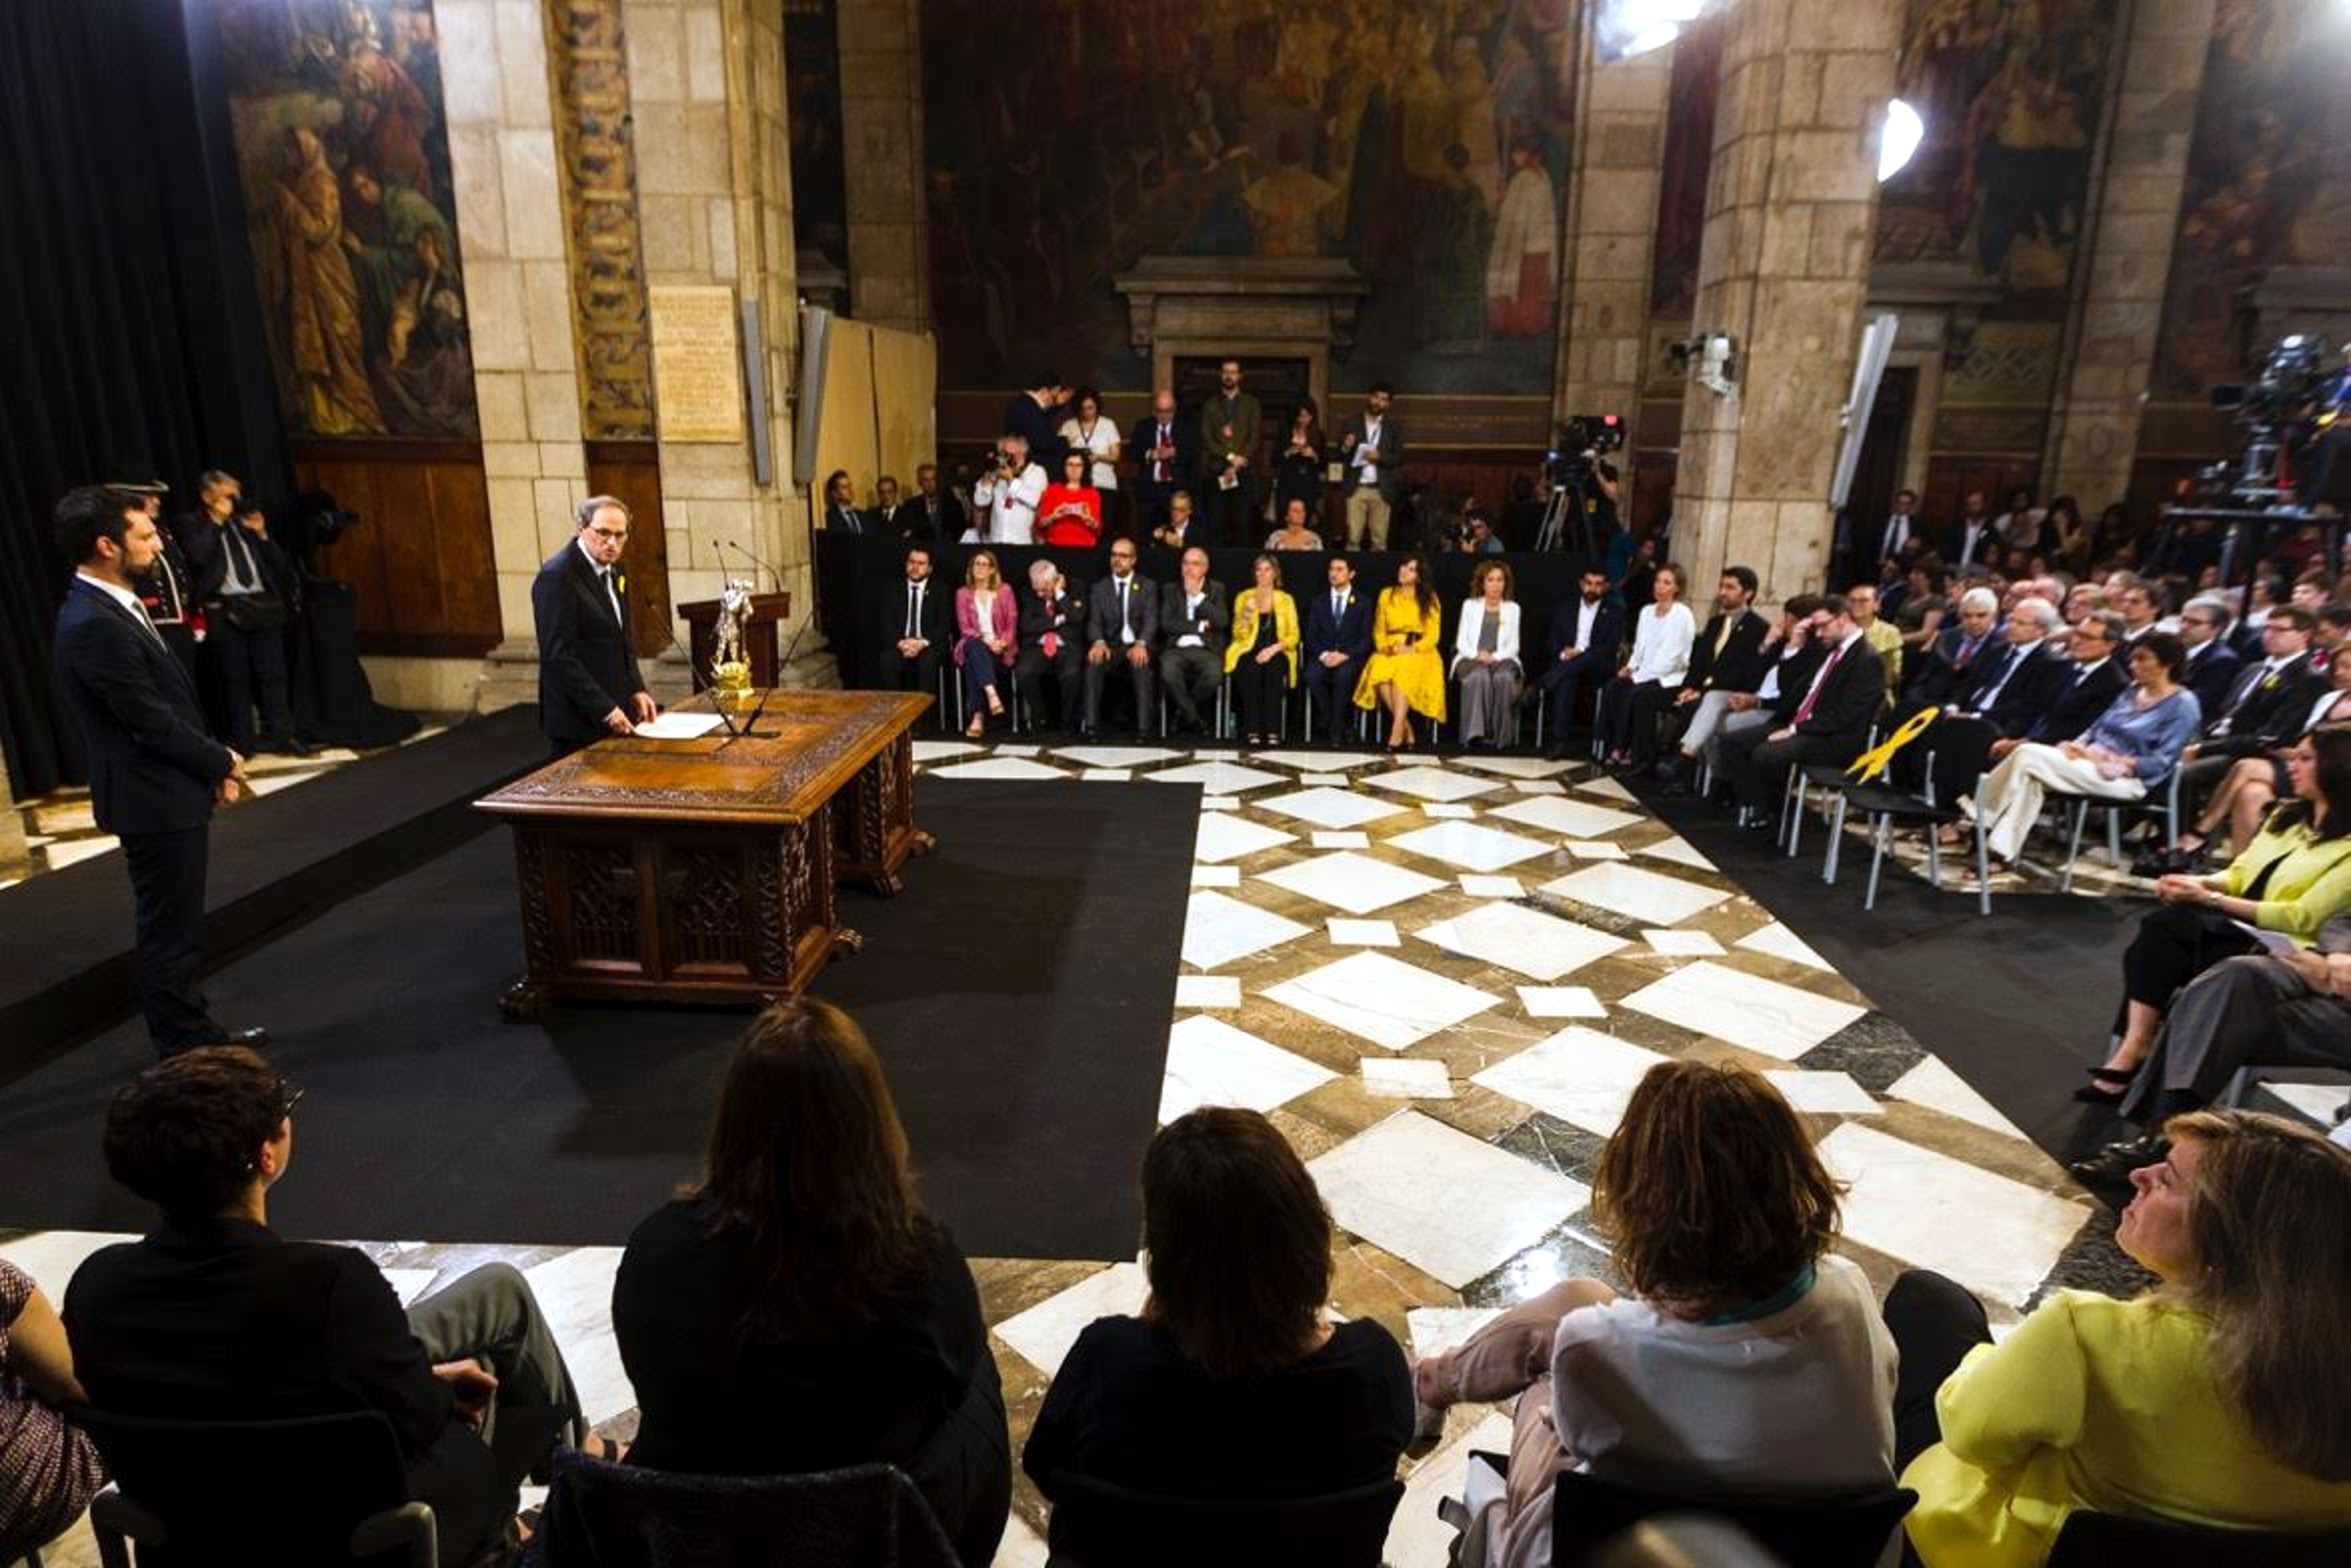 Catalan president Quim Torra and his ministers take office (by Marc Rovira)